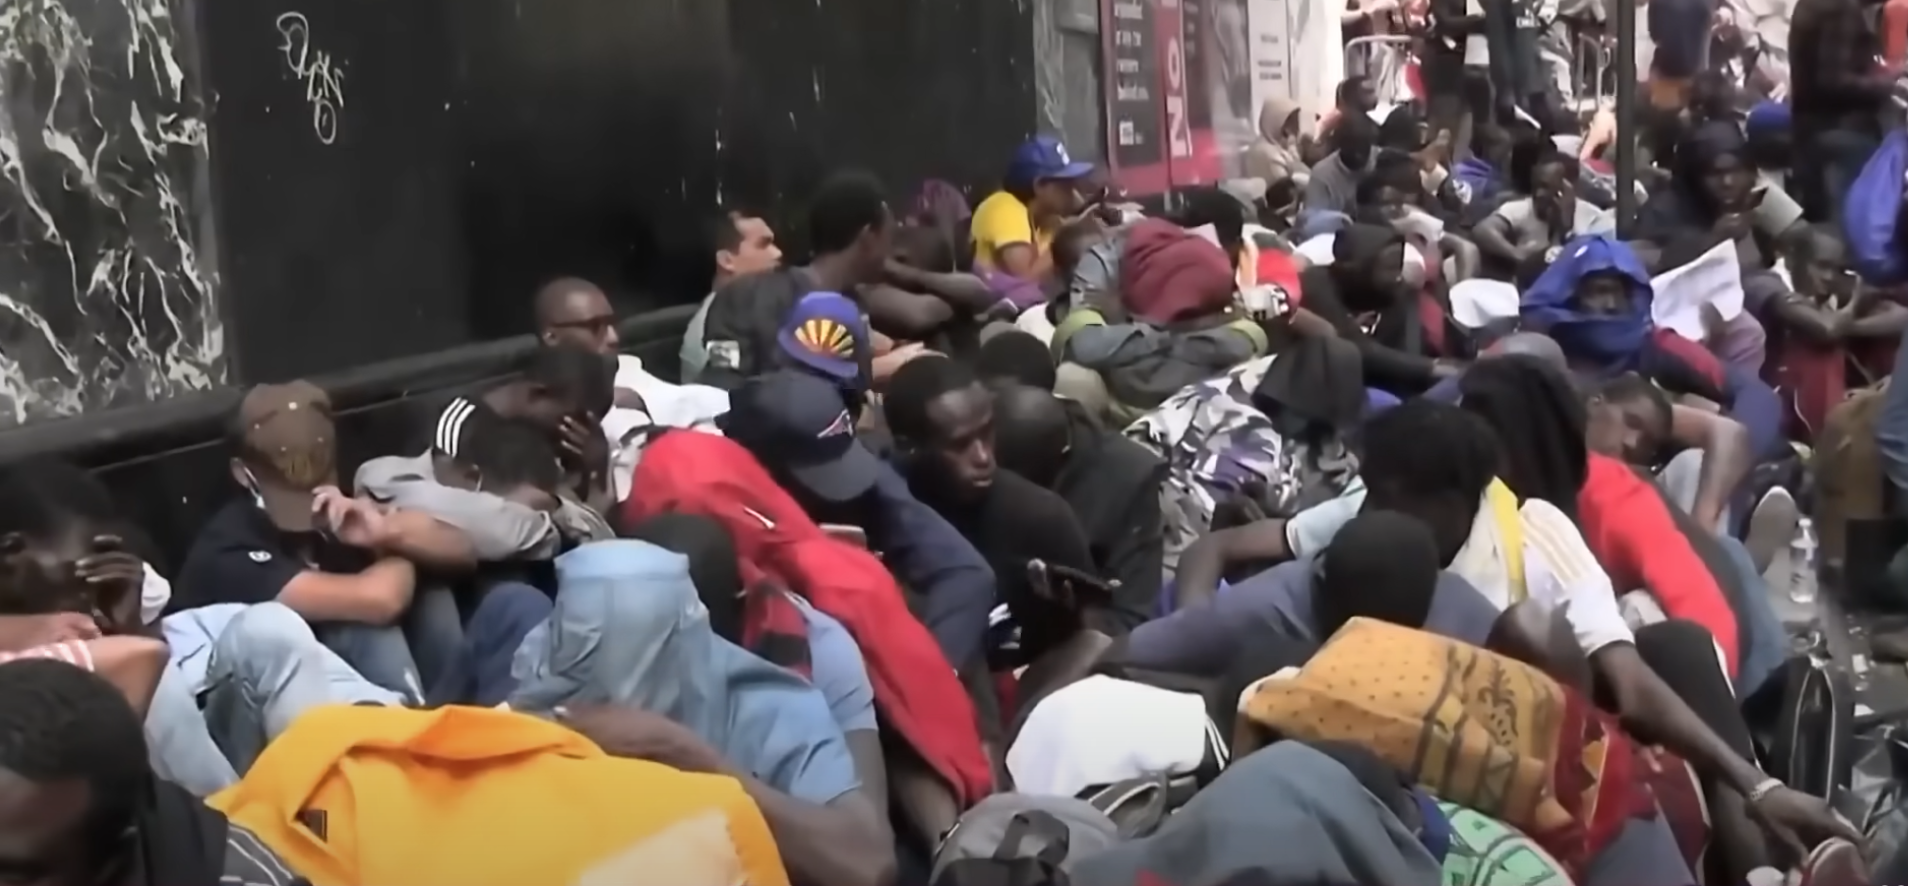 NYC Taxpayers: Cough Up $2.3 Bn For "Migrants"